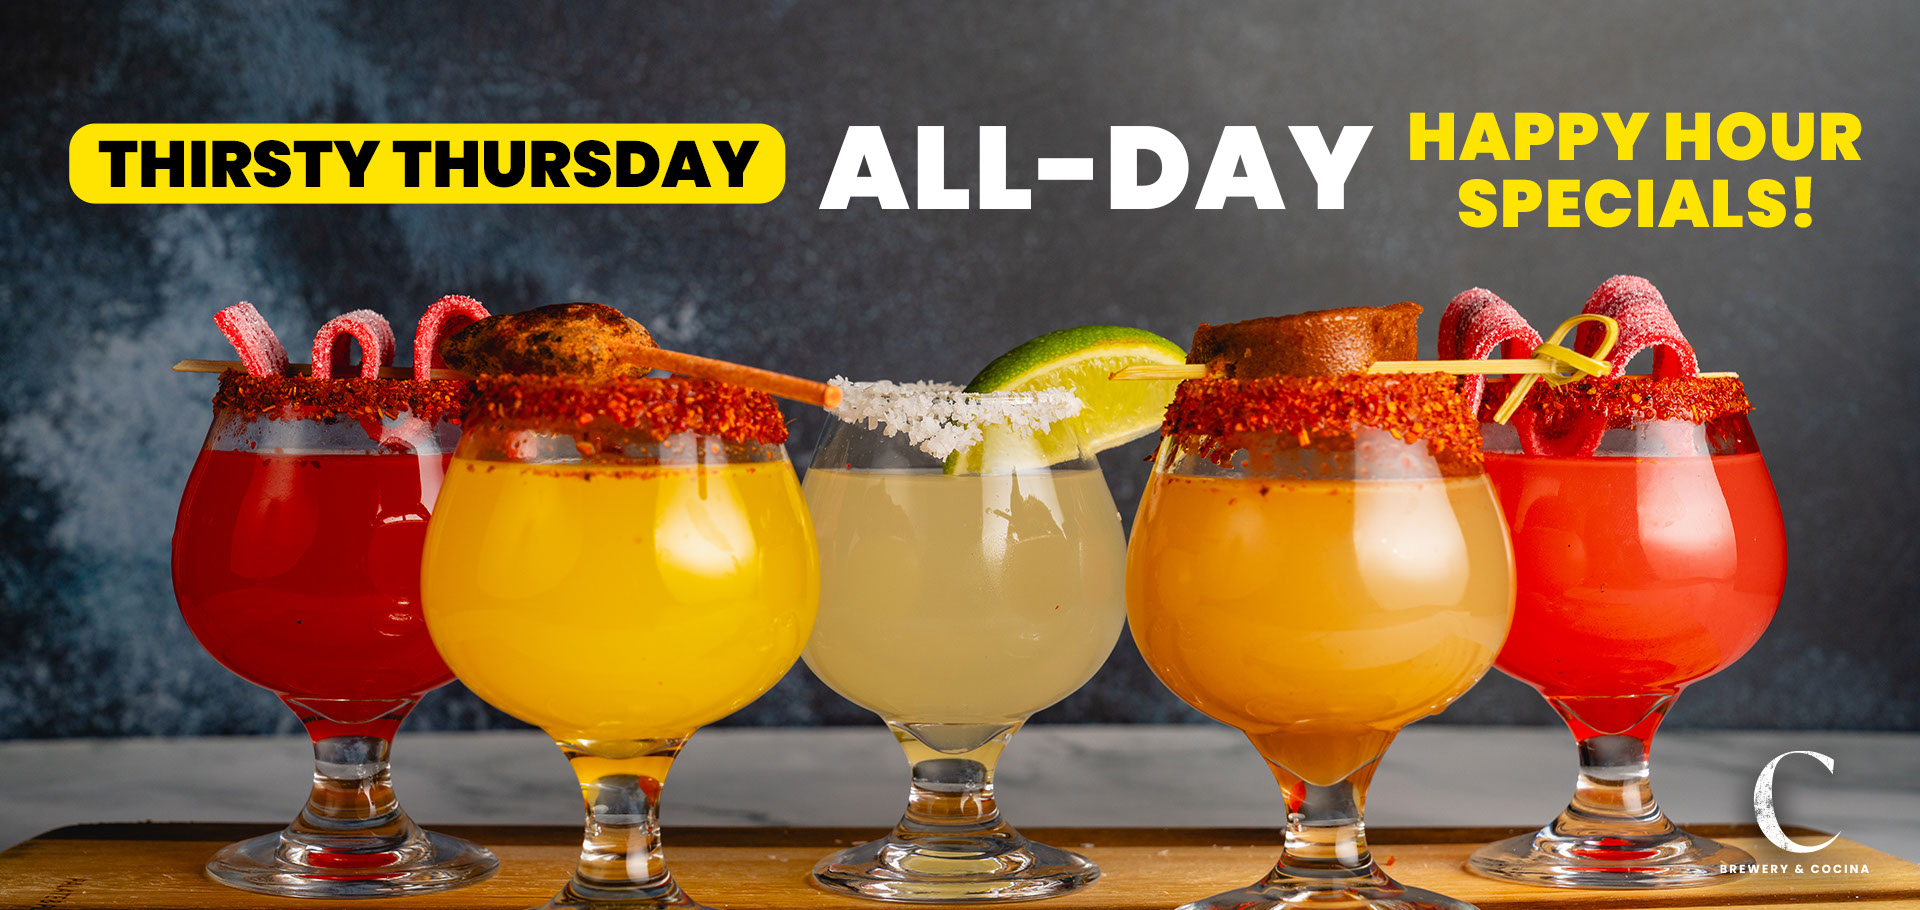 Thirsty Thursday - All-Day - Happy Hour Specials!